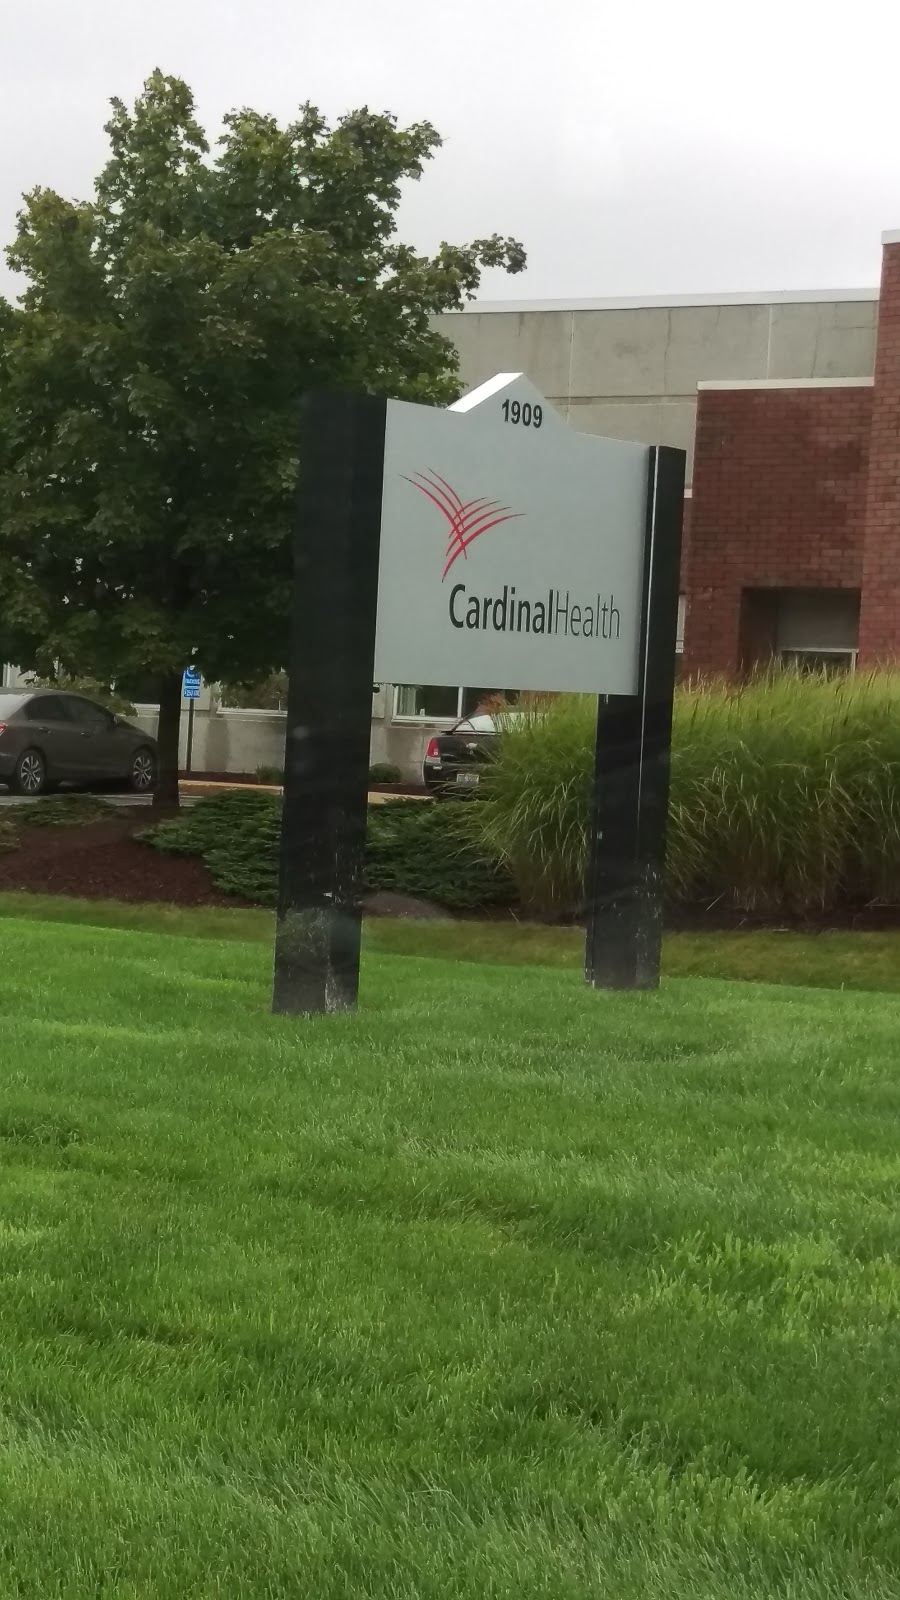 Cardinal Health at-Home | 1810 Summit Commerce Park, Twinsburg, OH 44087, USA | Phone: (800) 860-8027